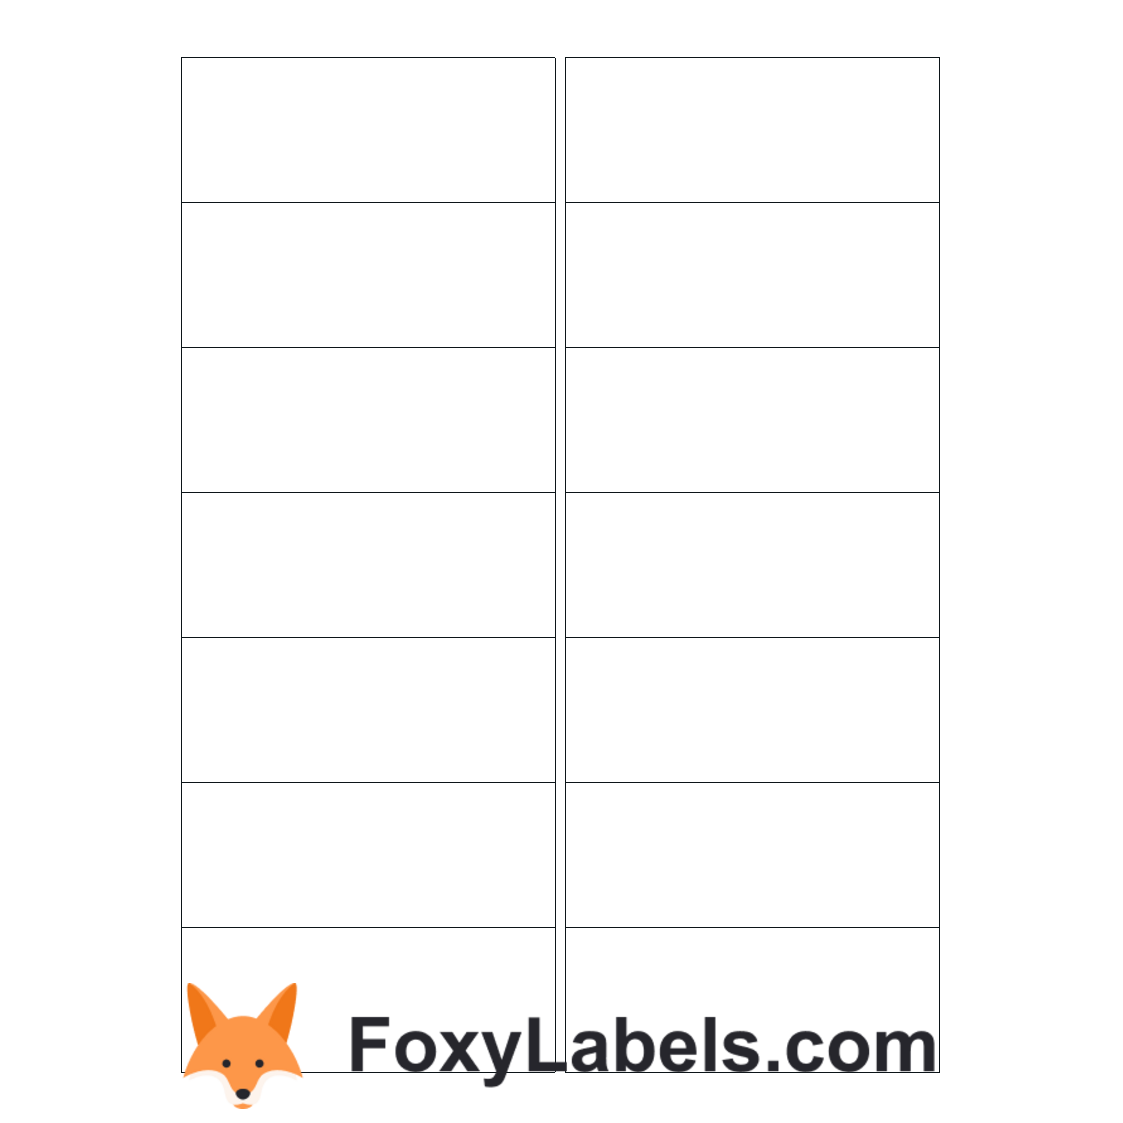 Avery L7163 label template for Google Docs